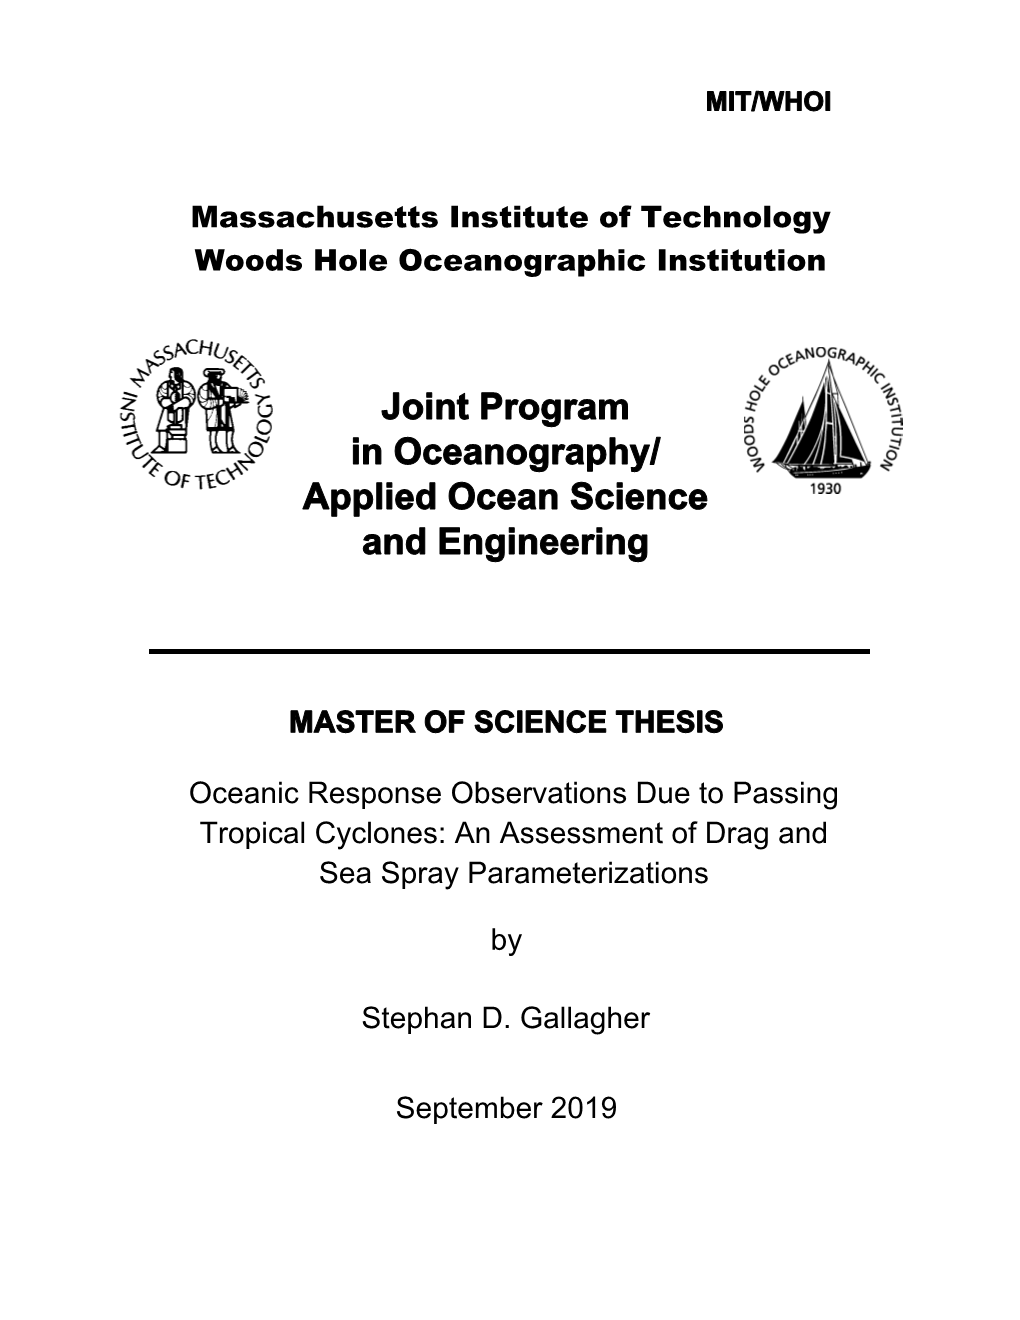 Joint Program in Oceanography/ Applied Ocean Science and Engineering